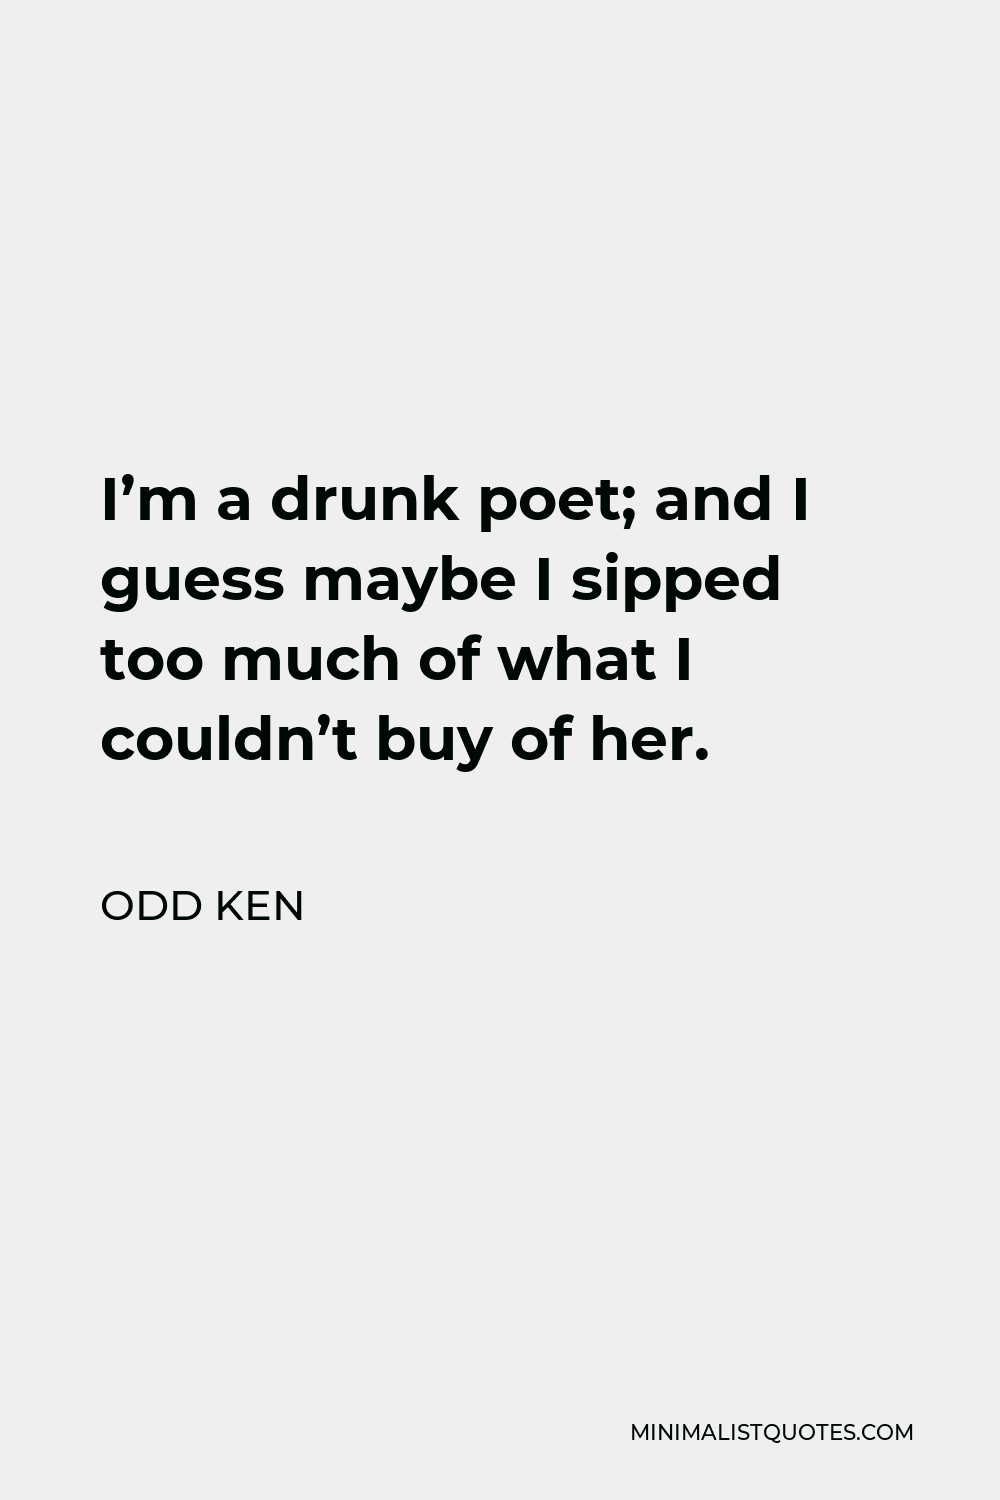 Odd Ken Quote - I’m a drunk poet; and I guess maybe I sipped too much of what I couldn’t buy of her.